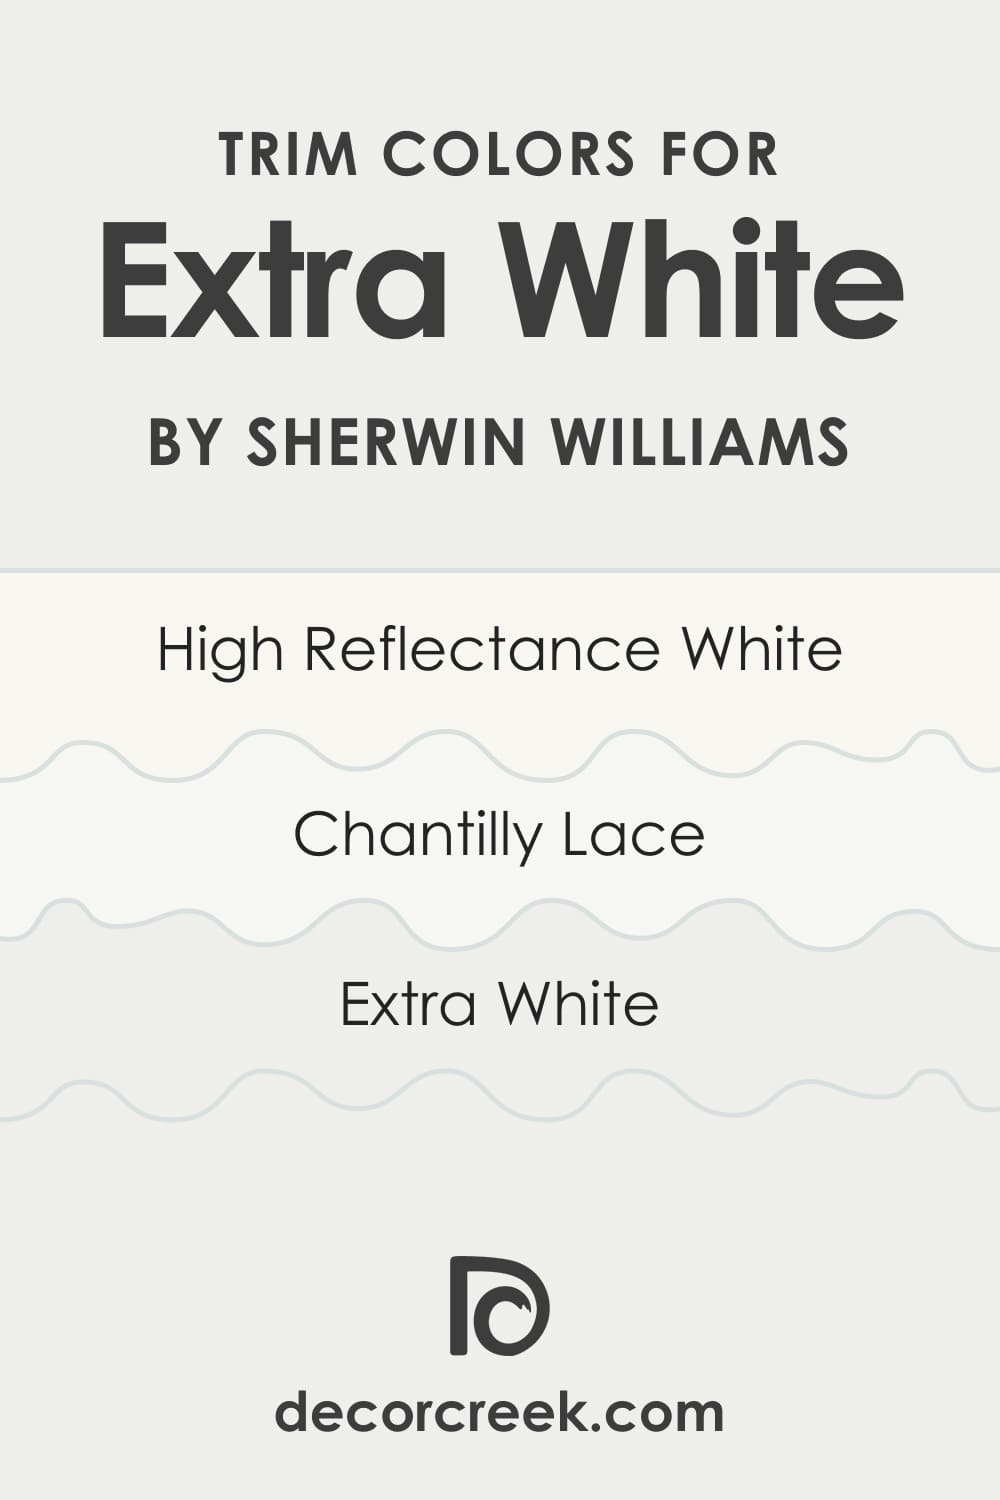 What’s the Best Trim Color to Use With SW Extra White?